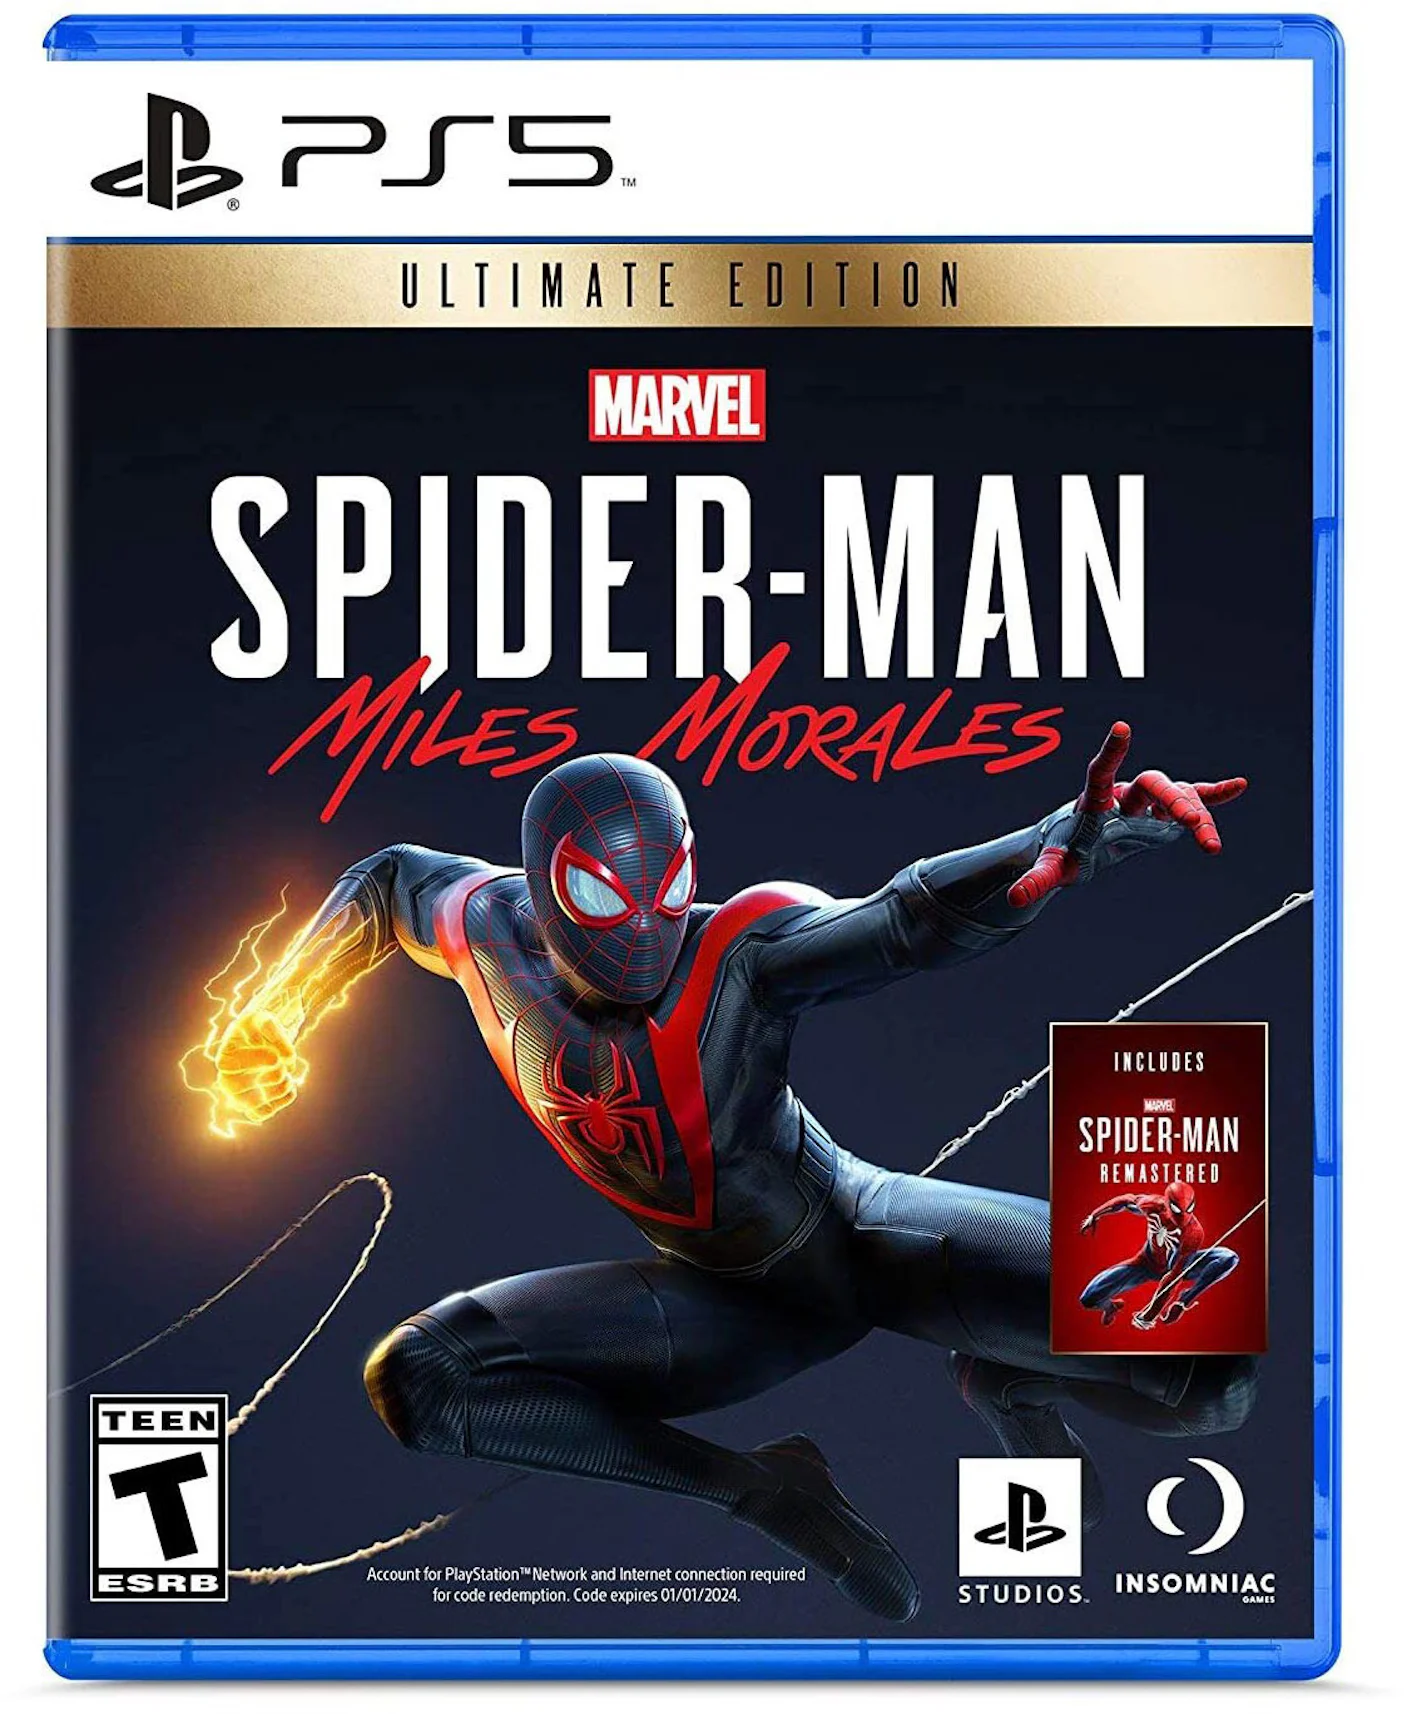 Sony PS5 Marvel's Spider-Man 2 Collector's Edition Video Game Bundle - MX